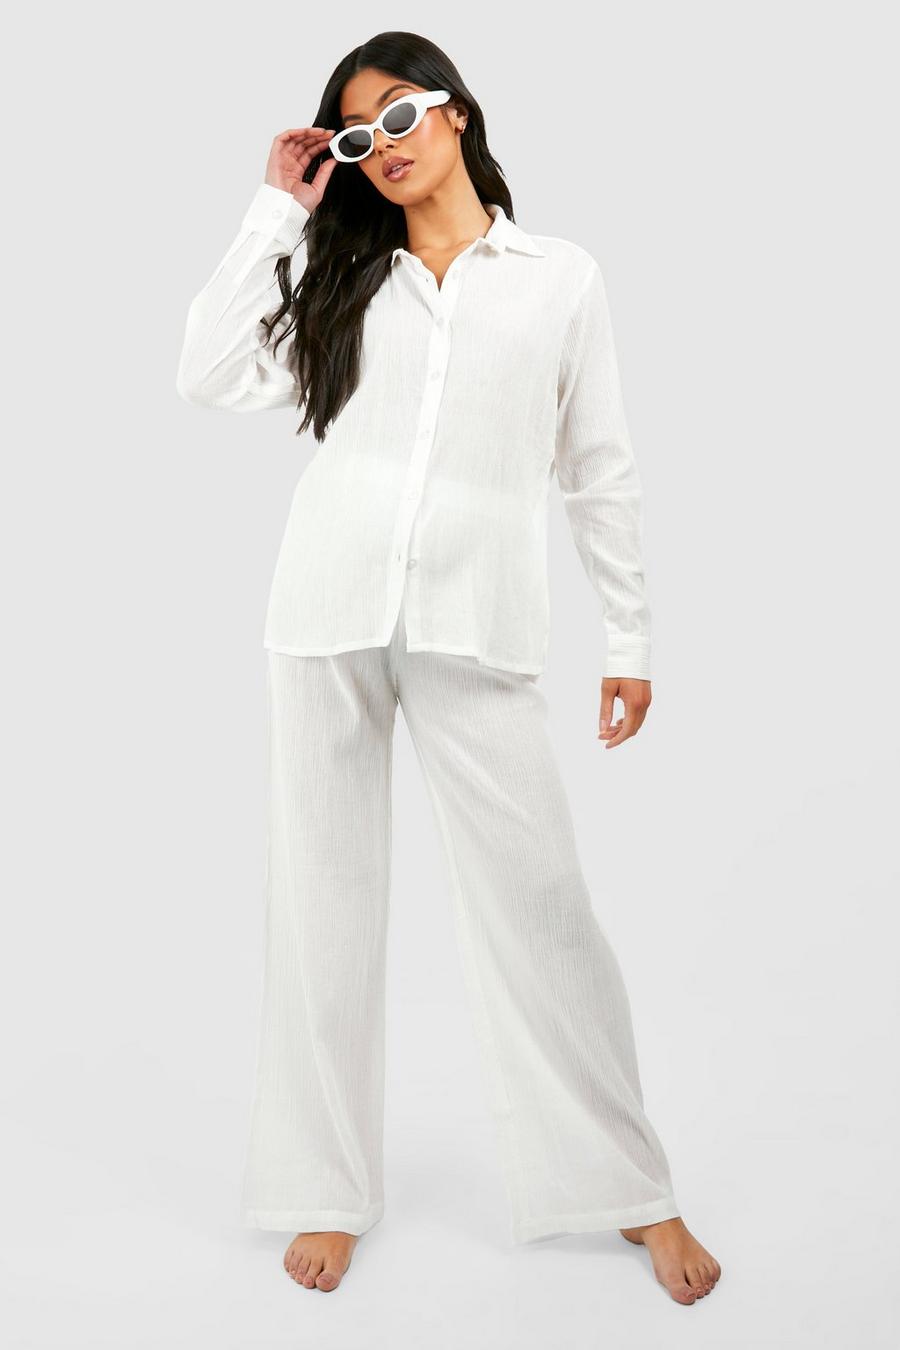 White Maternity Cheesecloth Beach Shirt And Pants Cover Up